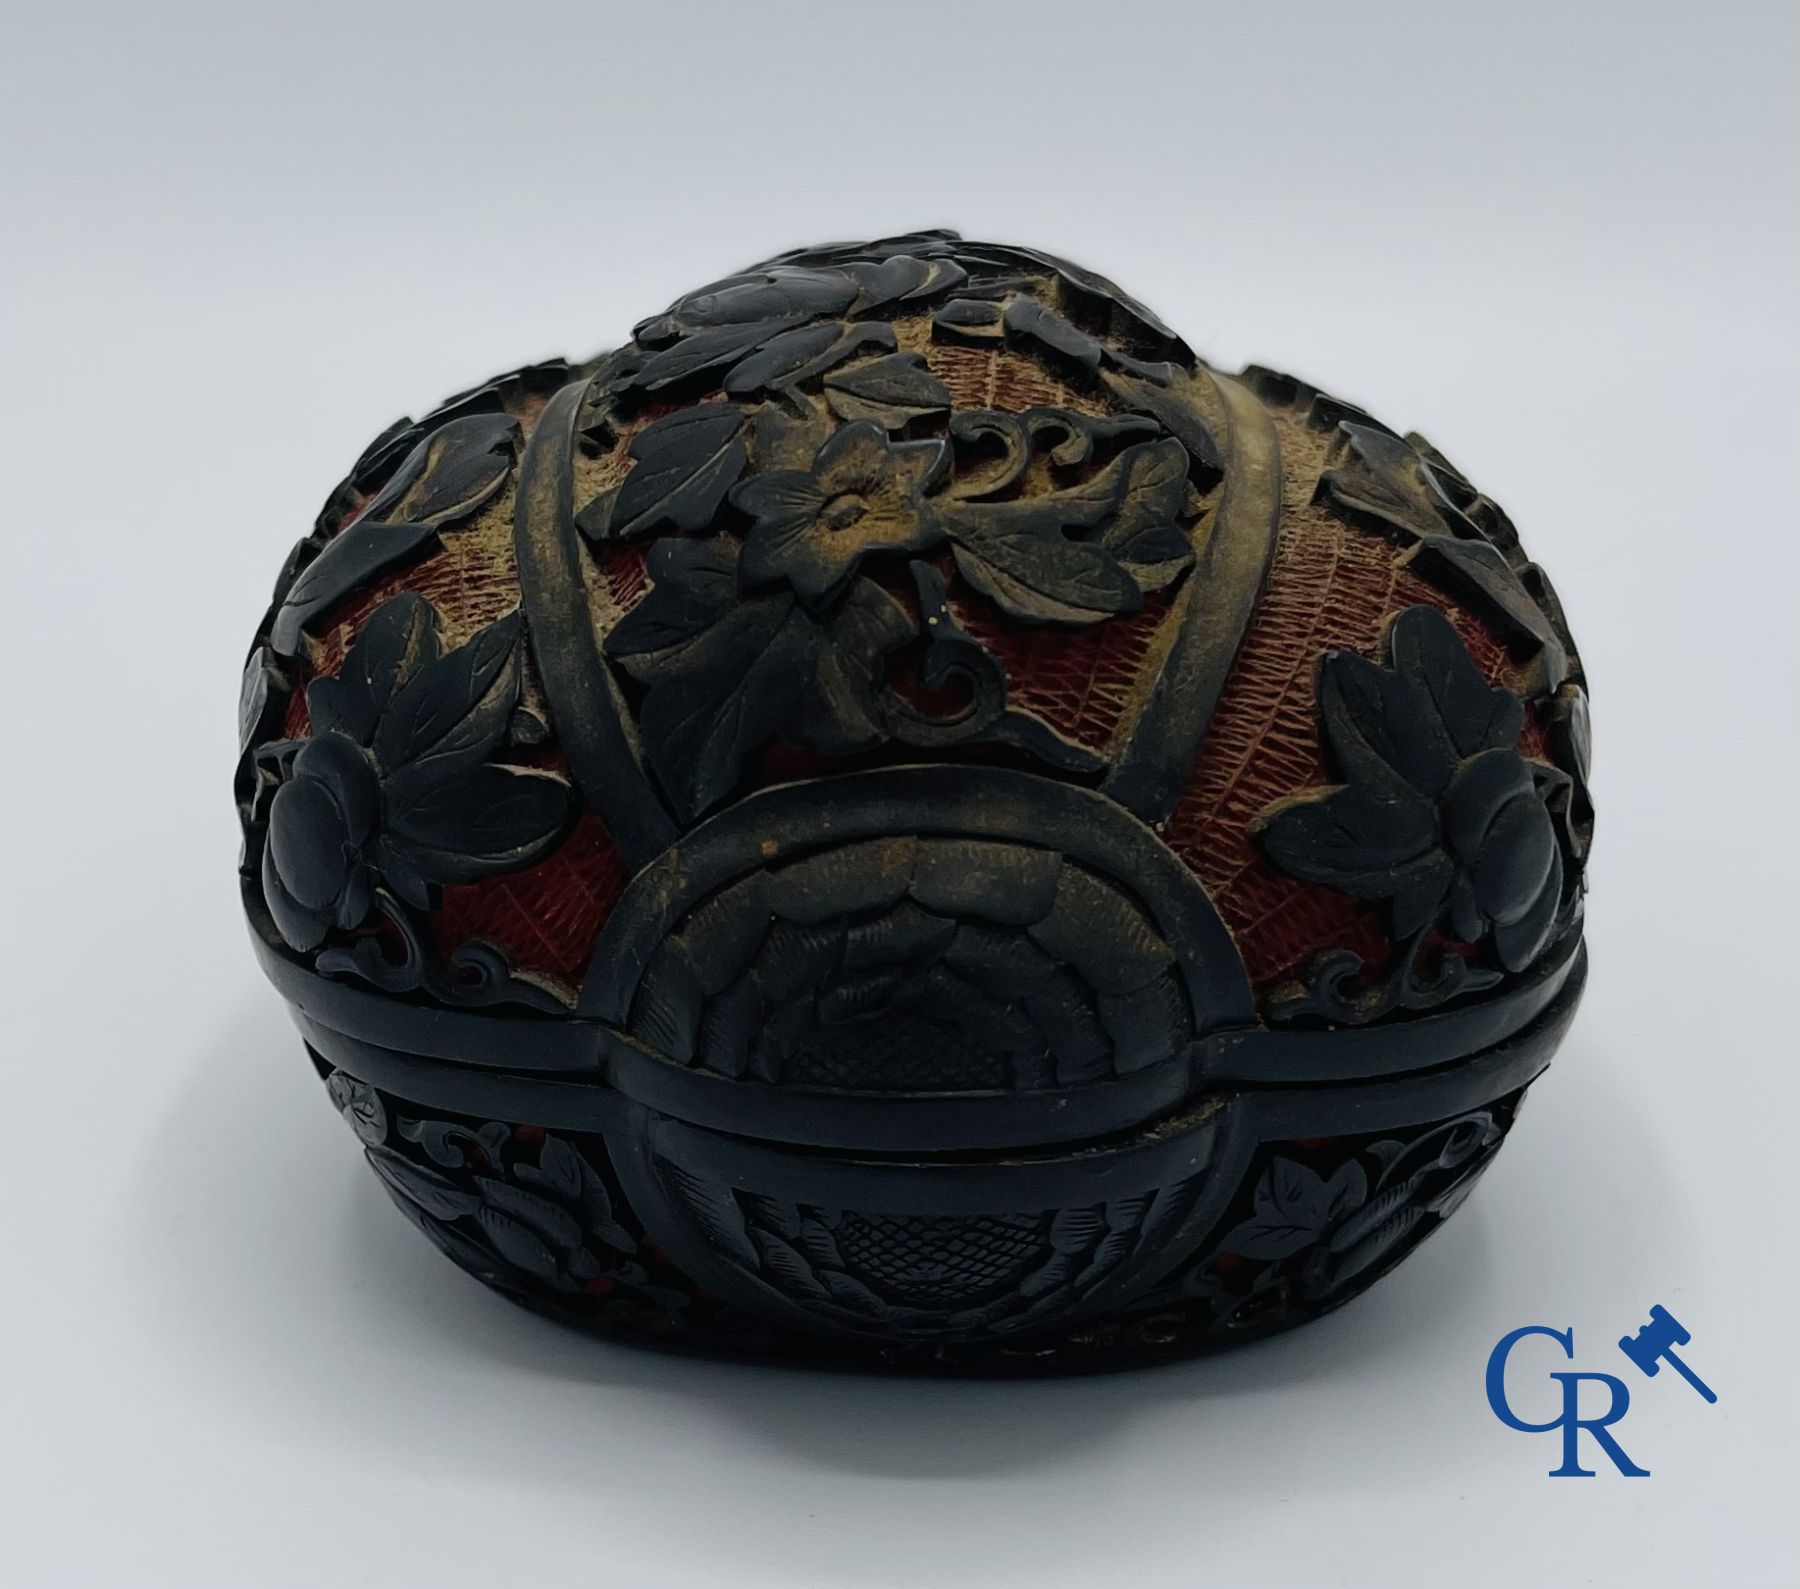 Asian Art: A finely carved Chinese lid box in black lacquer on a red background. - Image 4 of 12